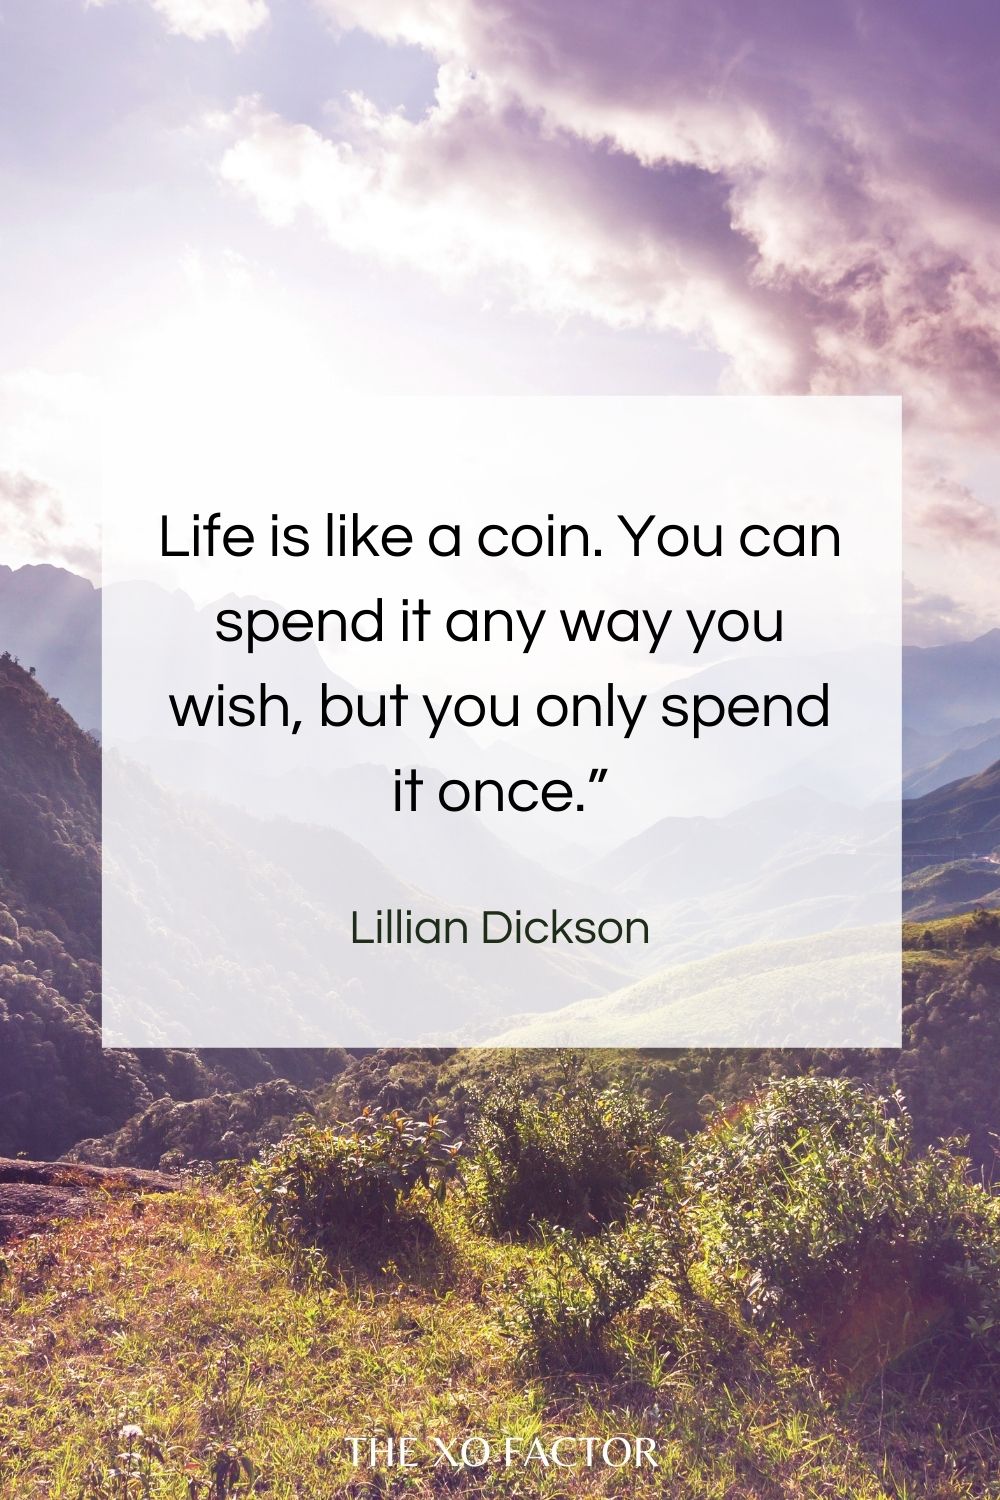 Life is like a coin. You can spend it any way you wish, but you only spend it once.”  Lillian Dickson